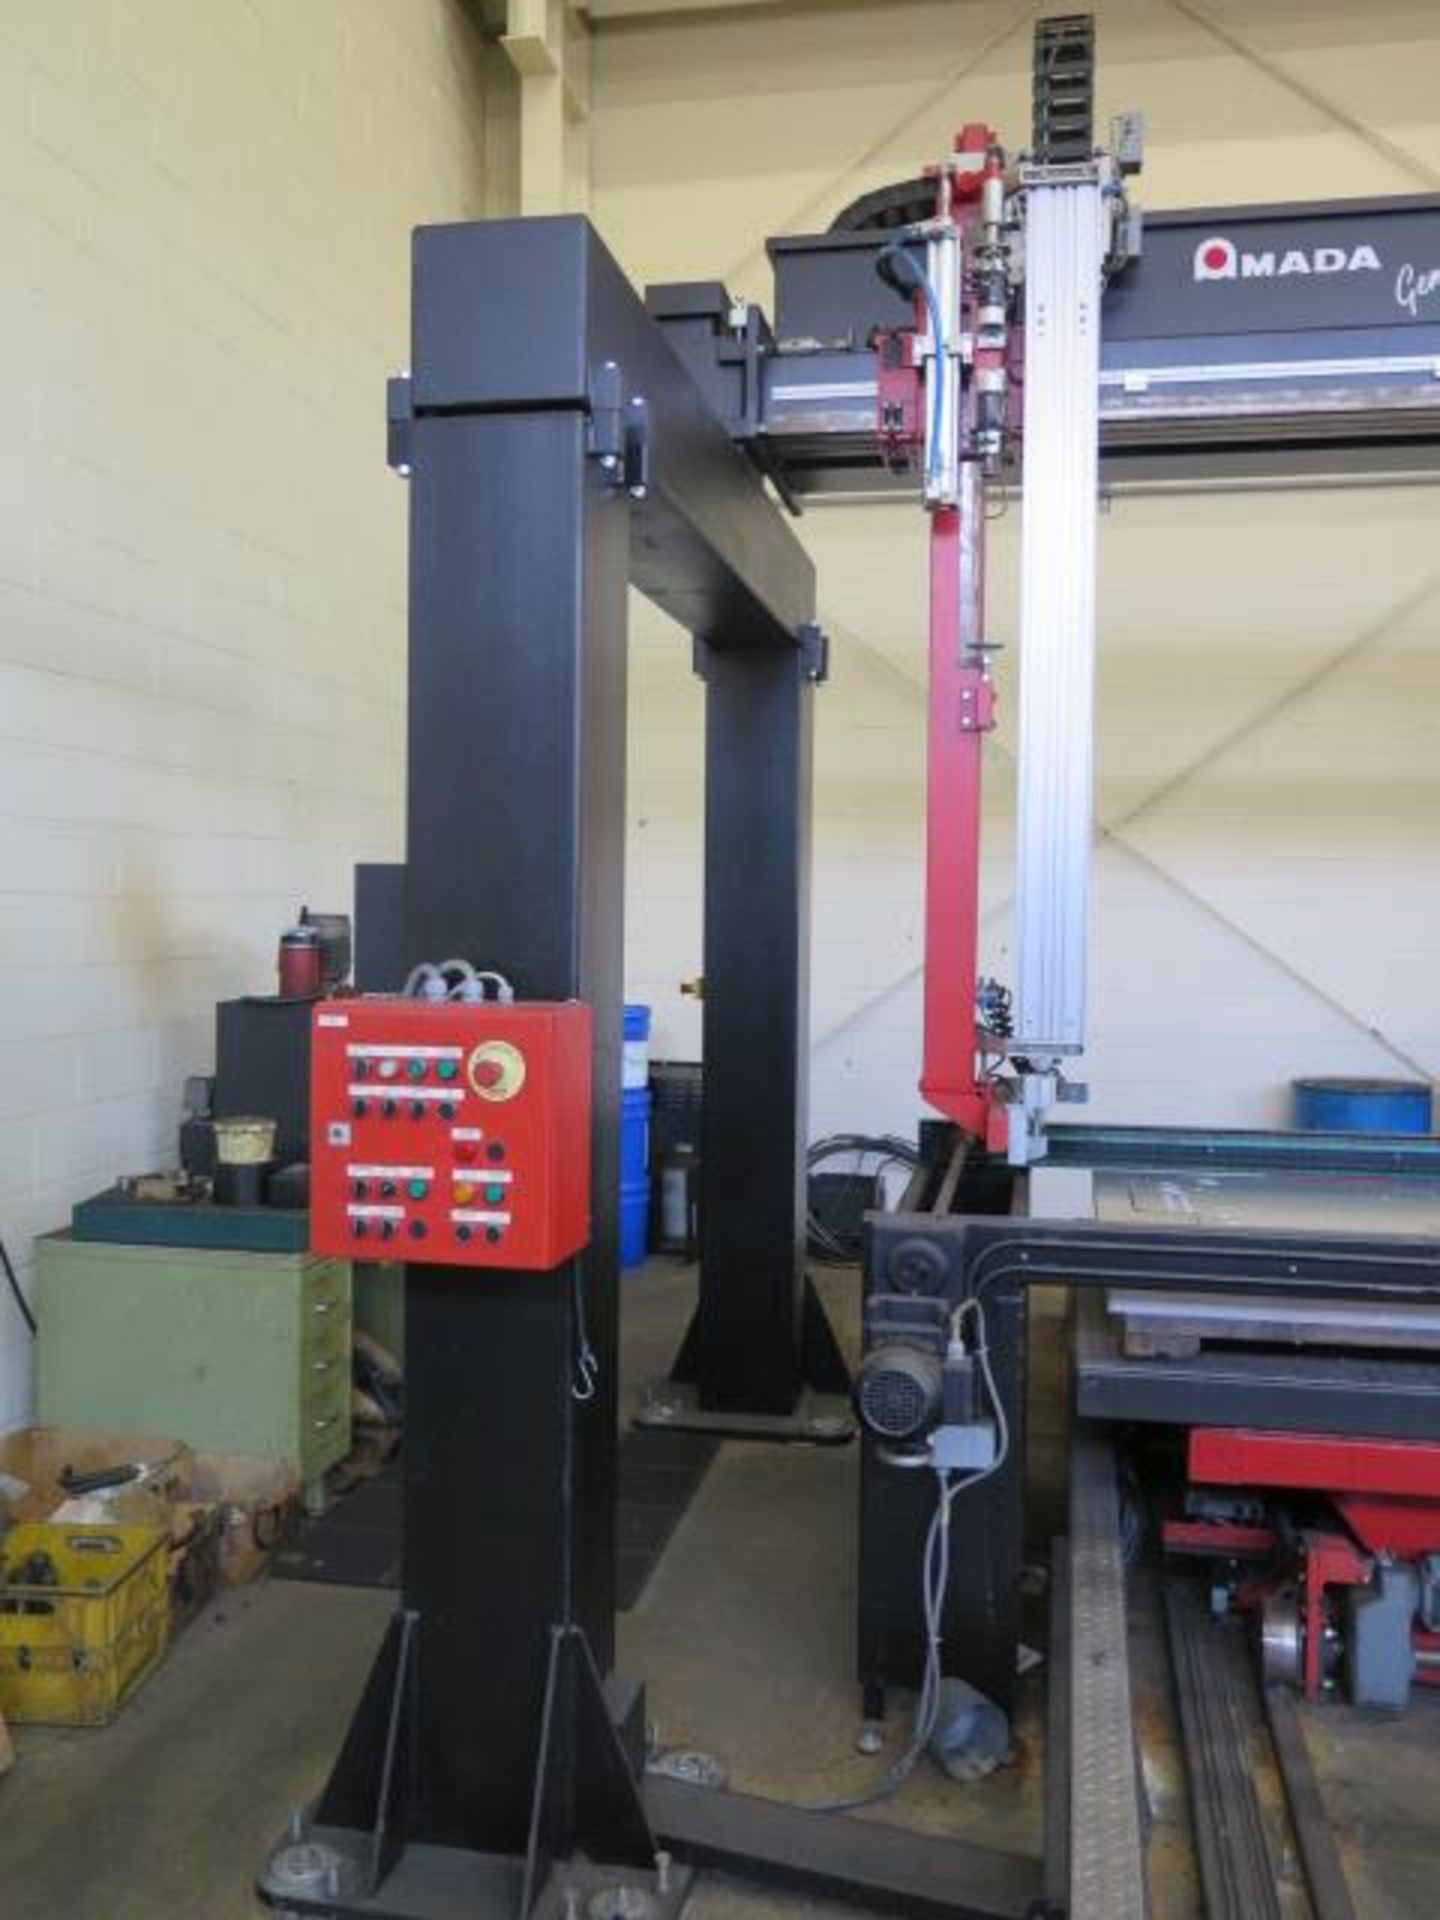 Amada VIPROS 357 30-Ton CNC Turret Punch Cell s/n 35710664 w/ 04P-C Controls, 58-Station, SOLD AS IS - Image 31 of 37